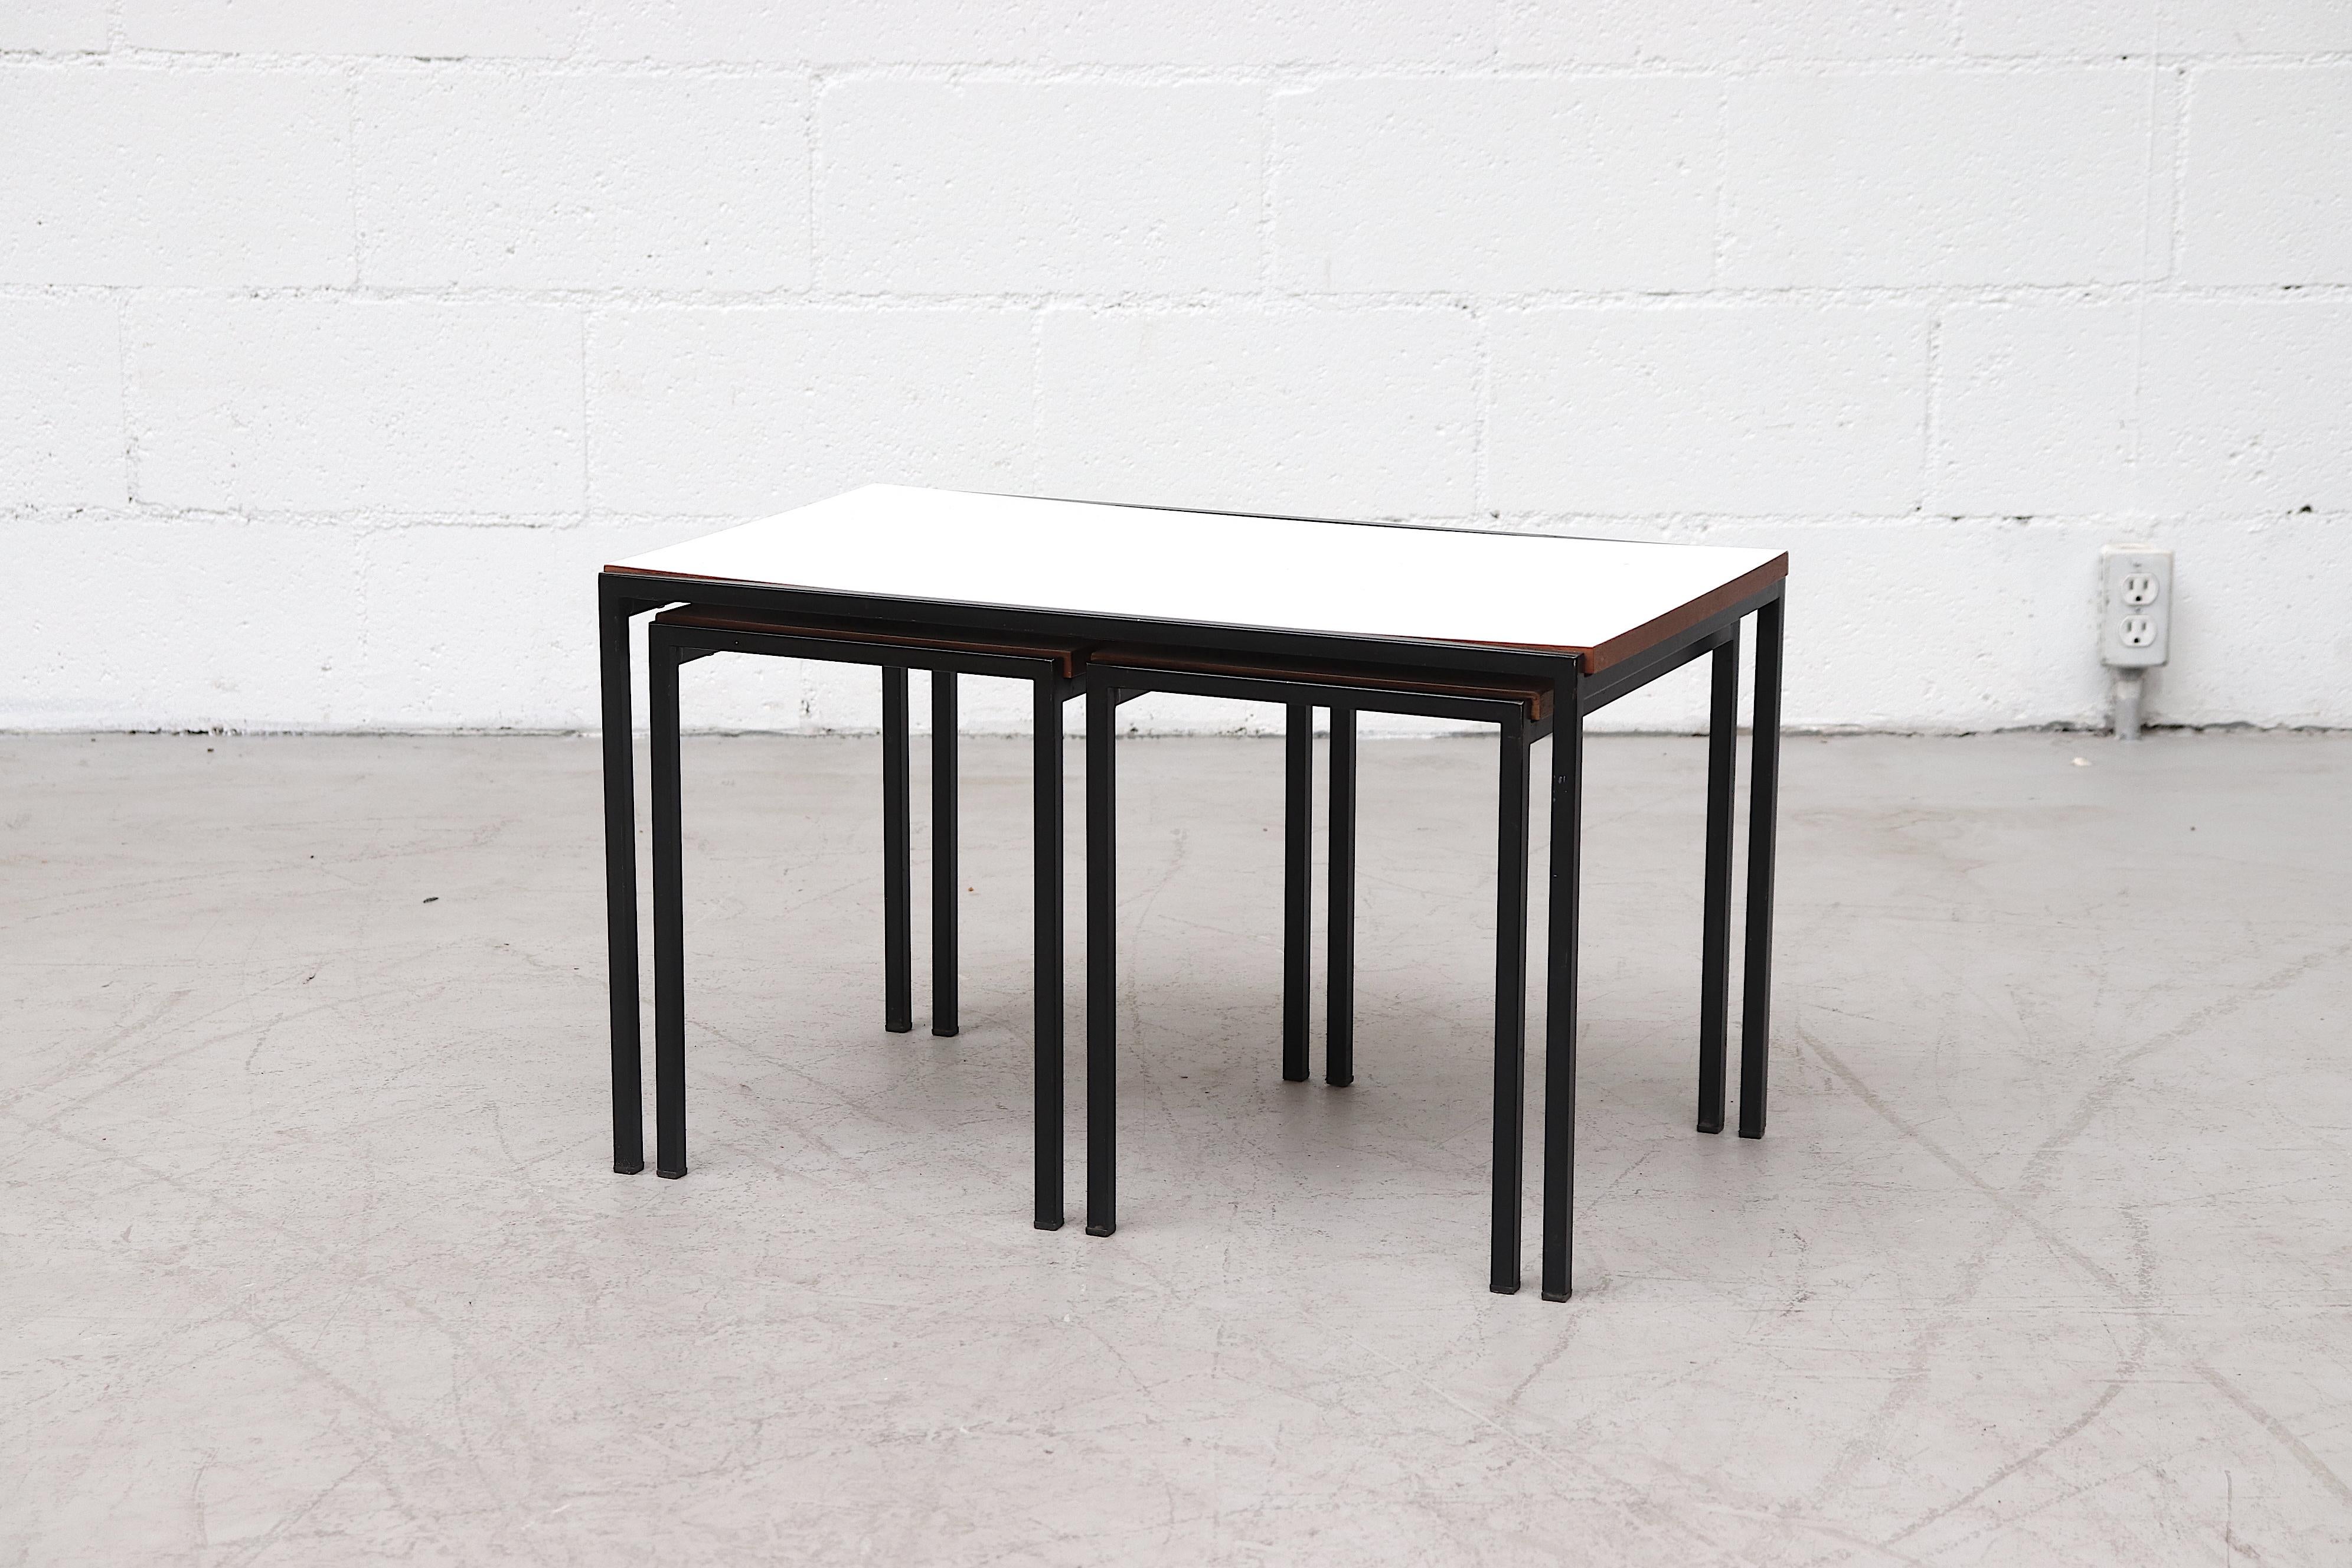 Amazing set of 3 Pastoe nesting tables with Formica tops, teak edging and black enameled metal frames. In original condition with visible wear and original manufacturer sticker. Set price.